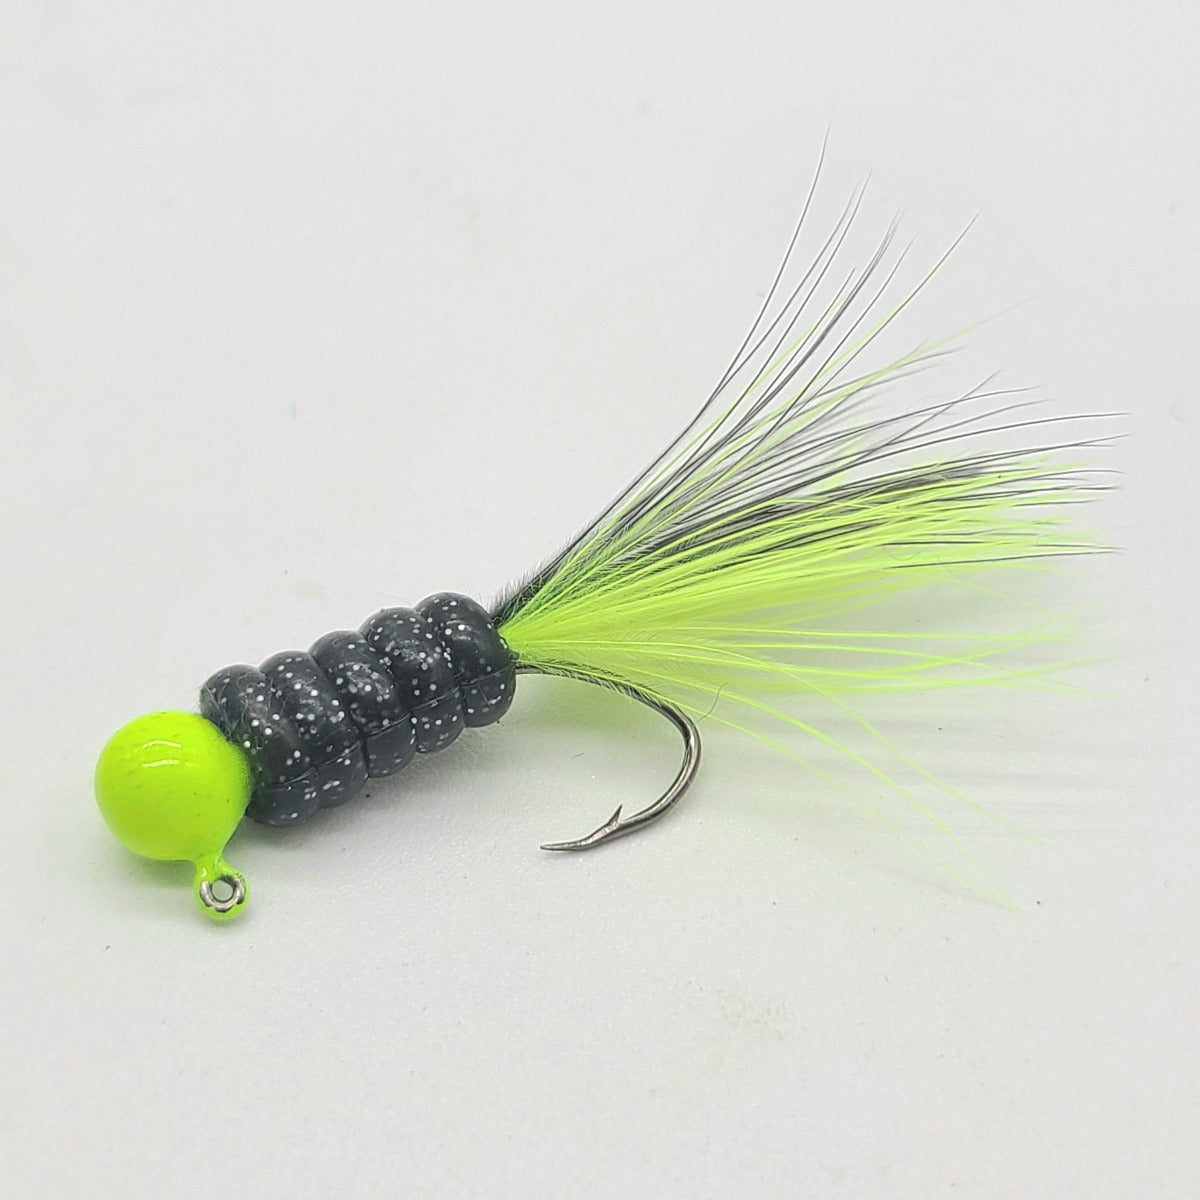 Hand tied Crappie jig, jelly belly jig with a black and silver flake  colored soft plastic body and a chartreuse marabou tail. The round jig head is custom painted with yellow chartreuse powder paint . The Crappie jig is Hand tied on a mustad sickle hook by Ramble tamble tackle.